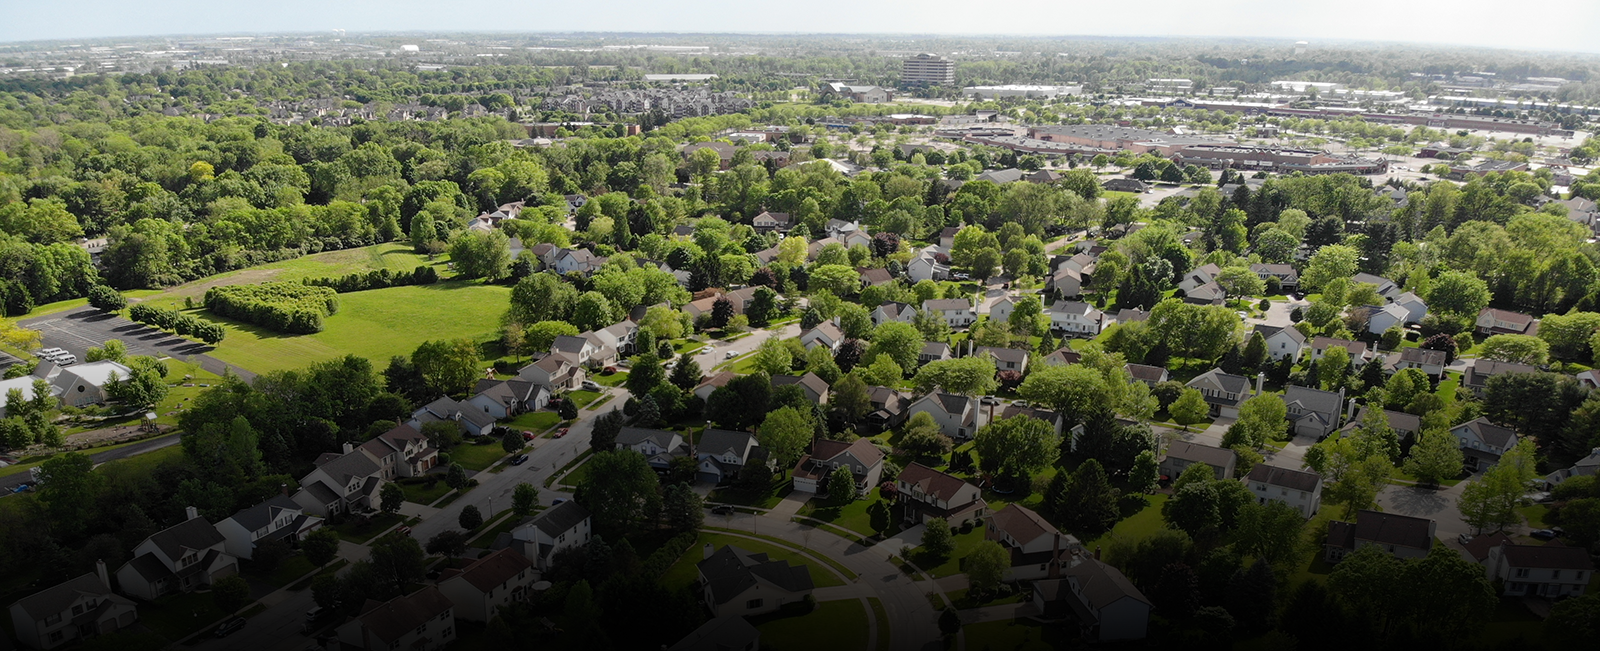 Hilliard Aerial & Drone Photography Services for Real Estate Listings and Construction Sites